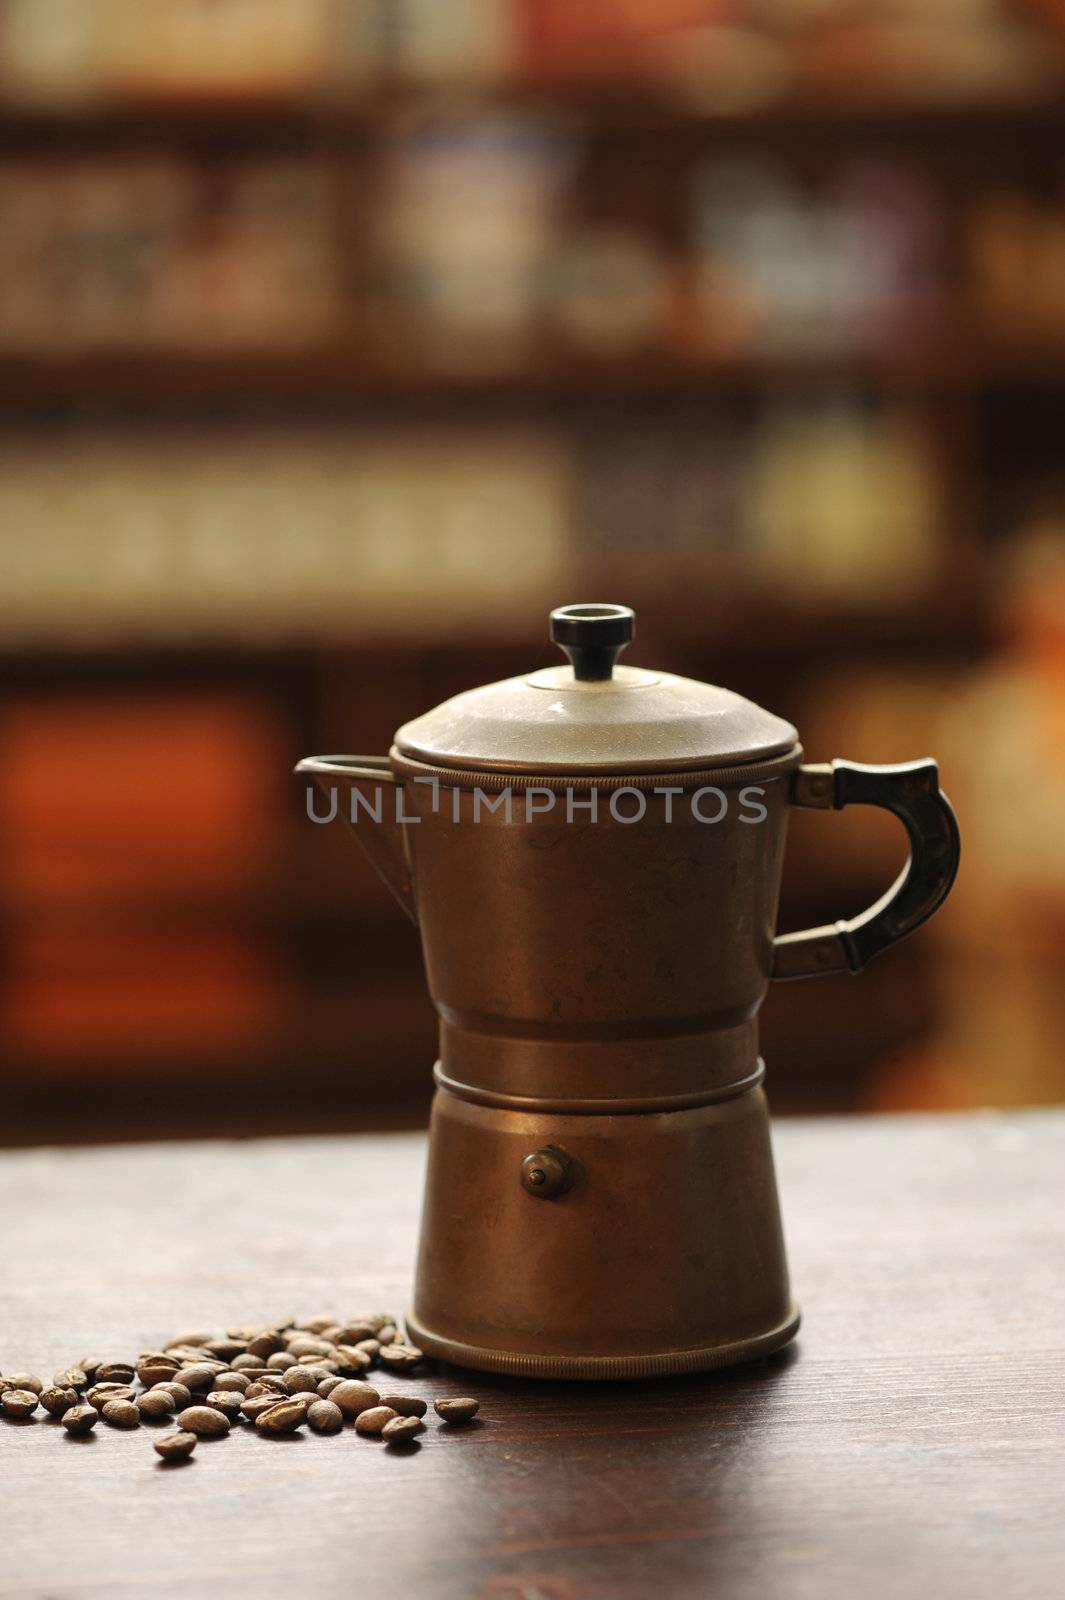 old coffee maker on wooden table